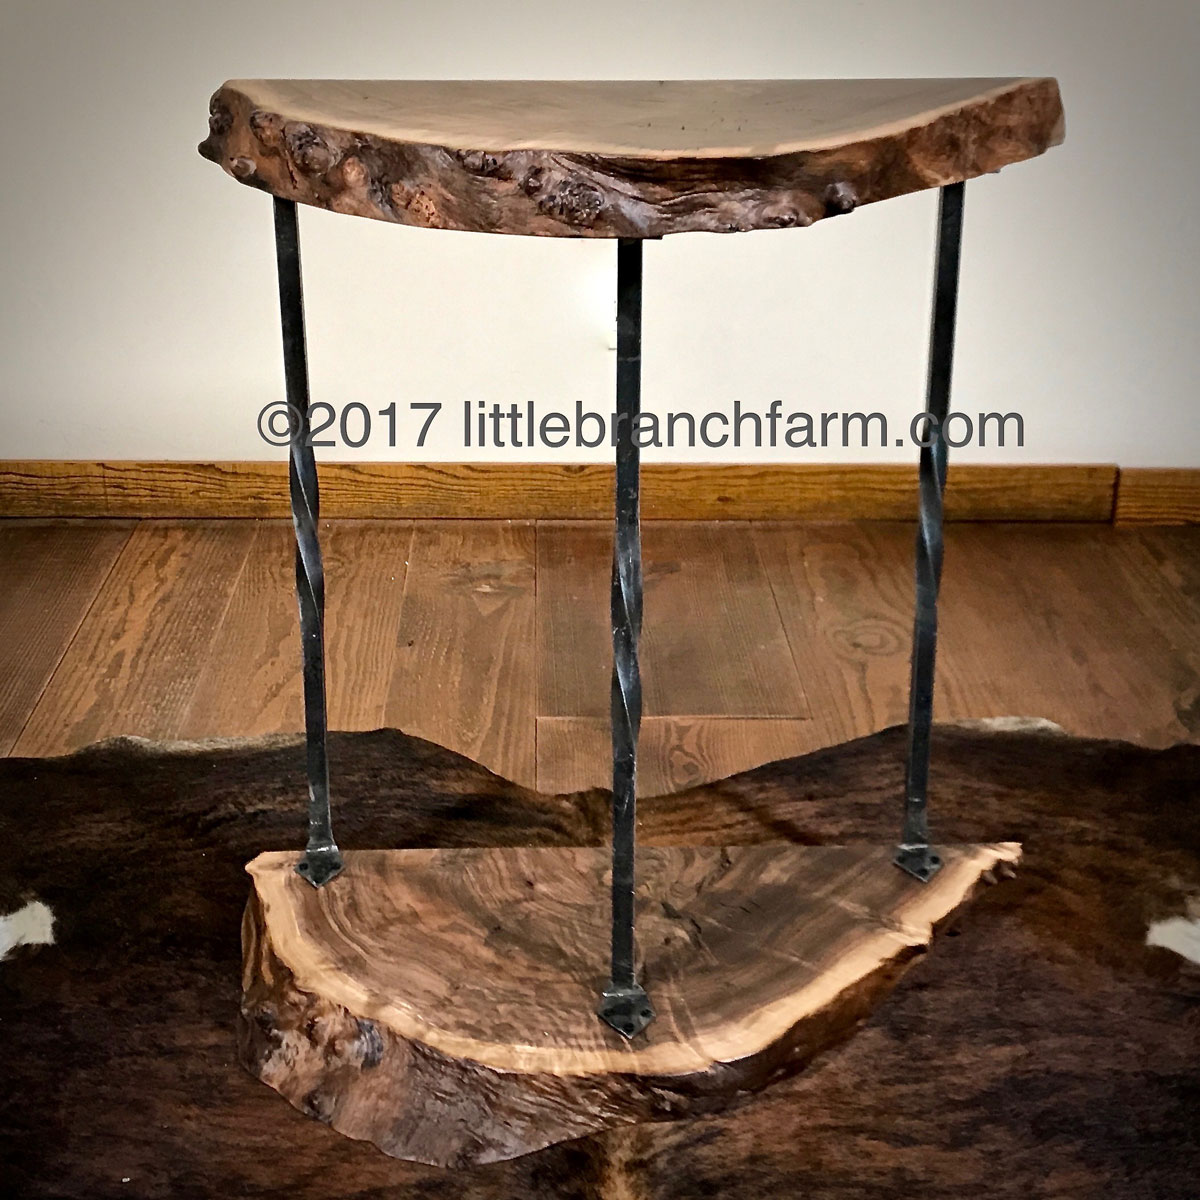 round tablecloth probably super nice forged iron end tables live edge wood accent table littlebranch farm slab rustic bedside blue buffalo dog treats footlocker storage trunk